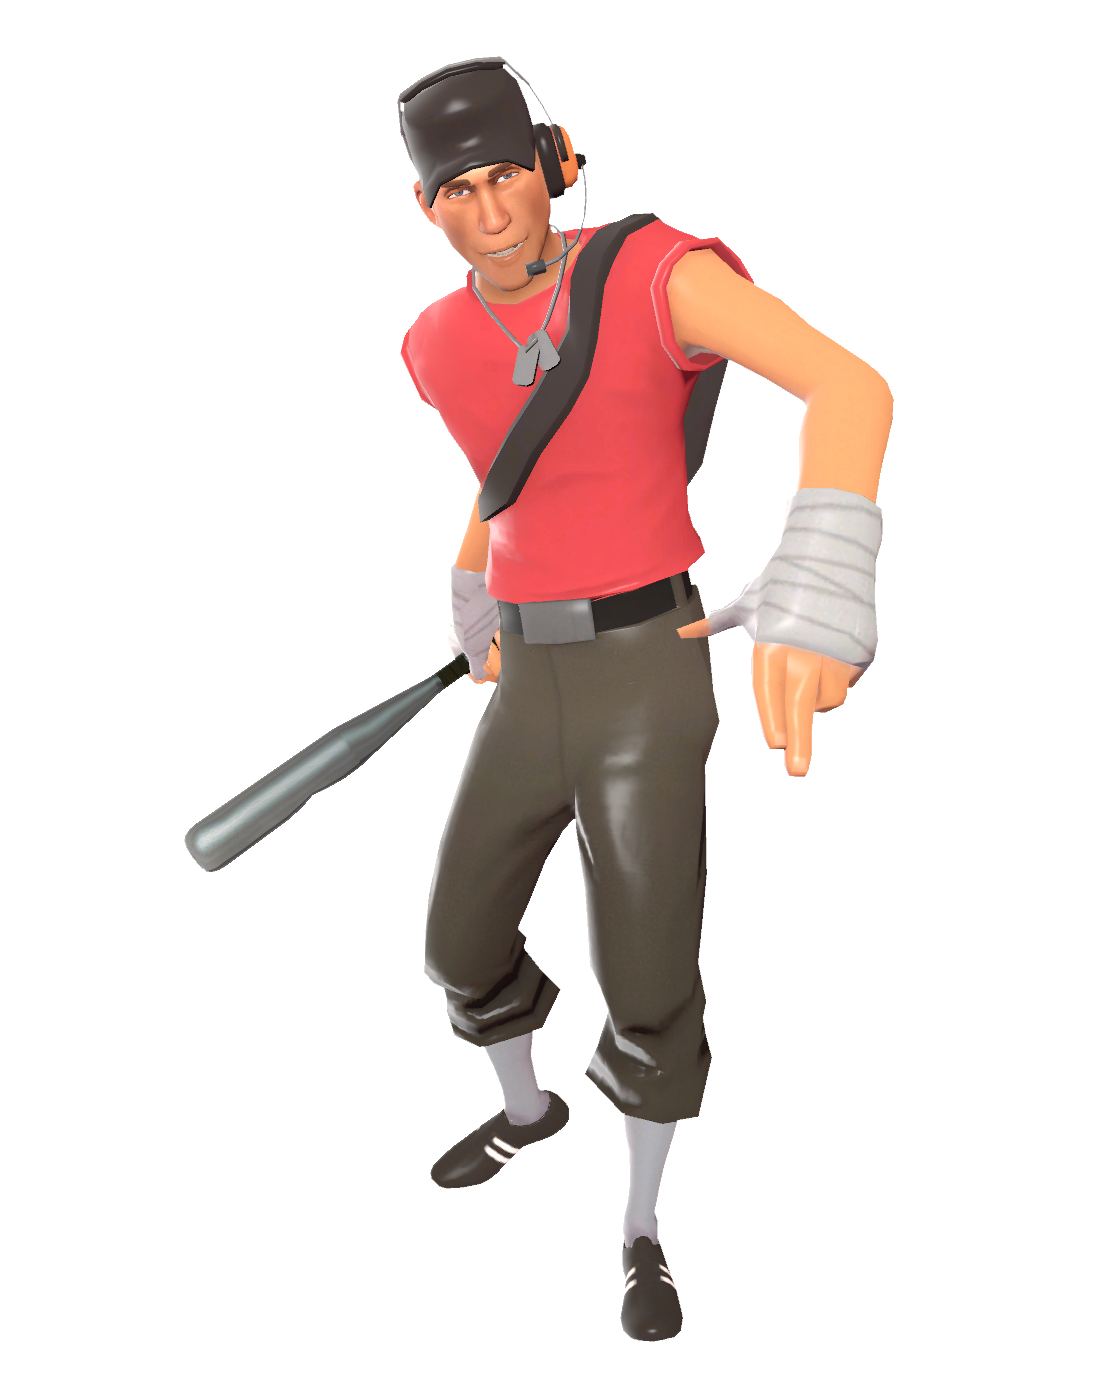 Team scout. Тим фортрес 2 ращведчик. Scout tf2. Team Fortress 2 Скаут. Scout из Team Fortress 2.